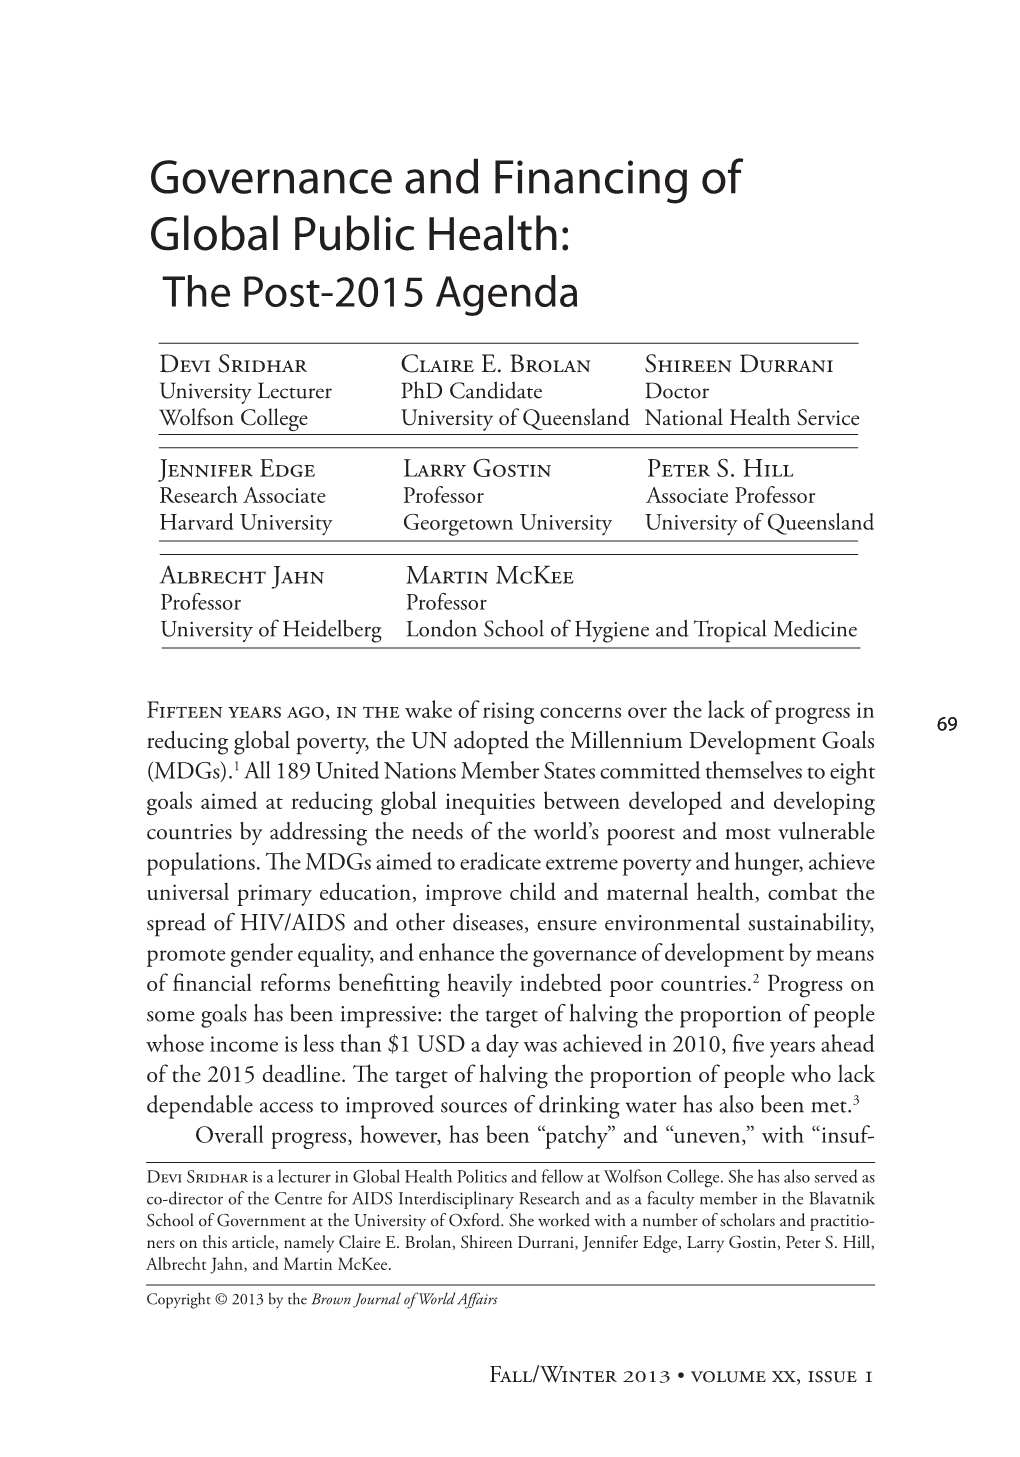 Governance and Financing of Global Public Health: the Post-2015 Agenda